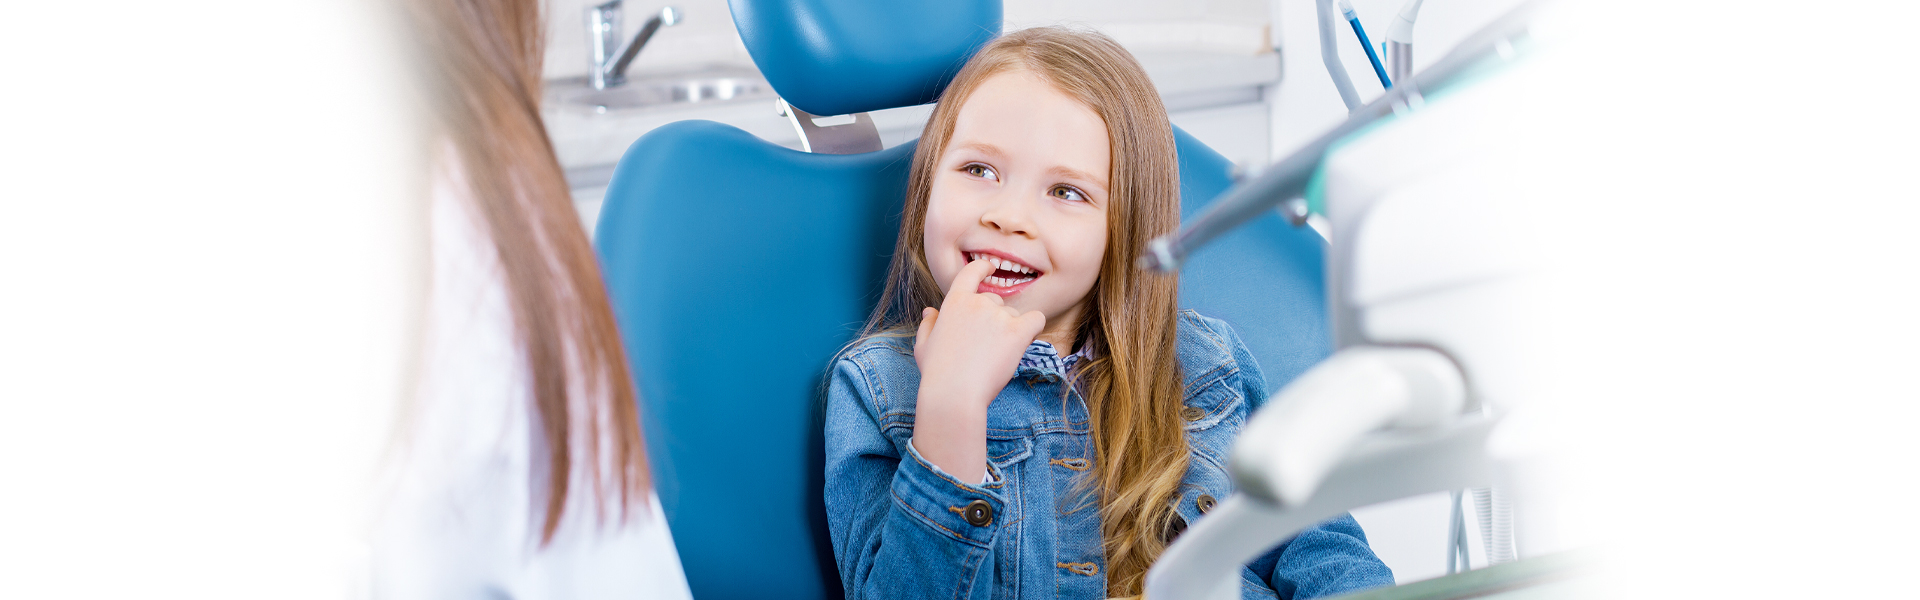 What Types of Treatments Does a Pediatric Dentist Provide?